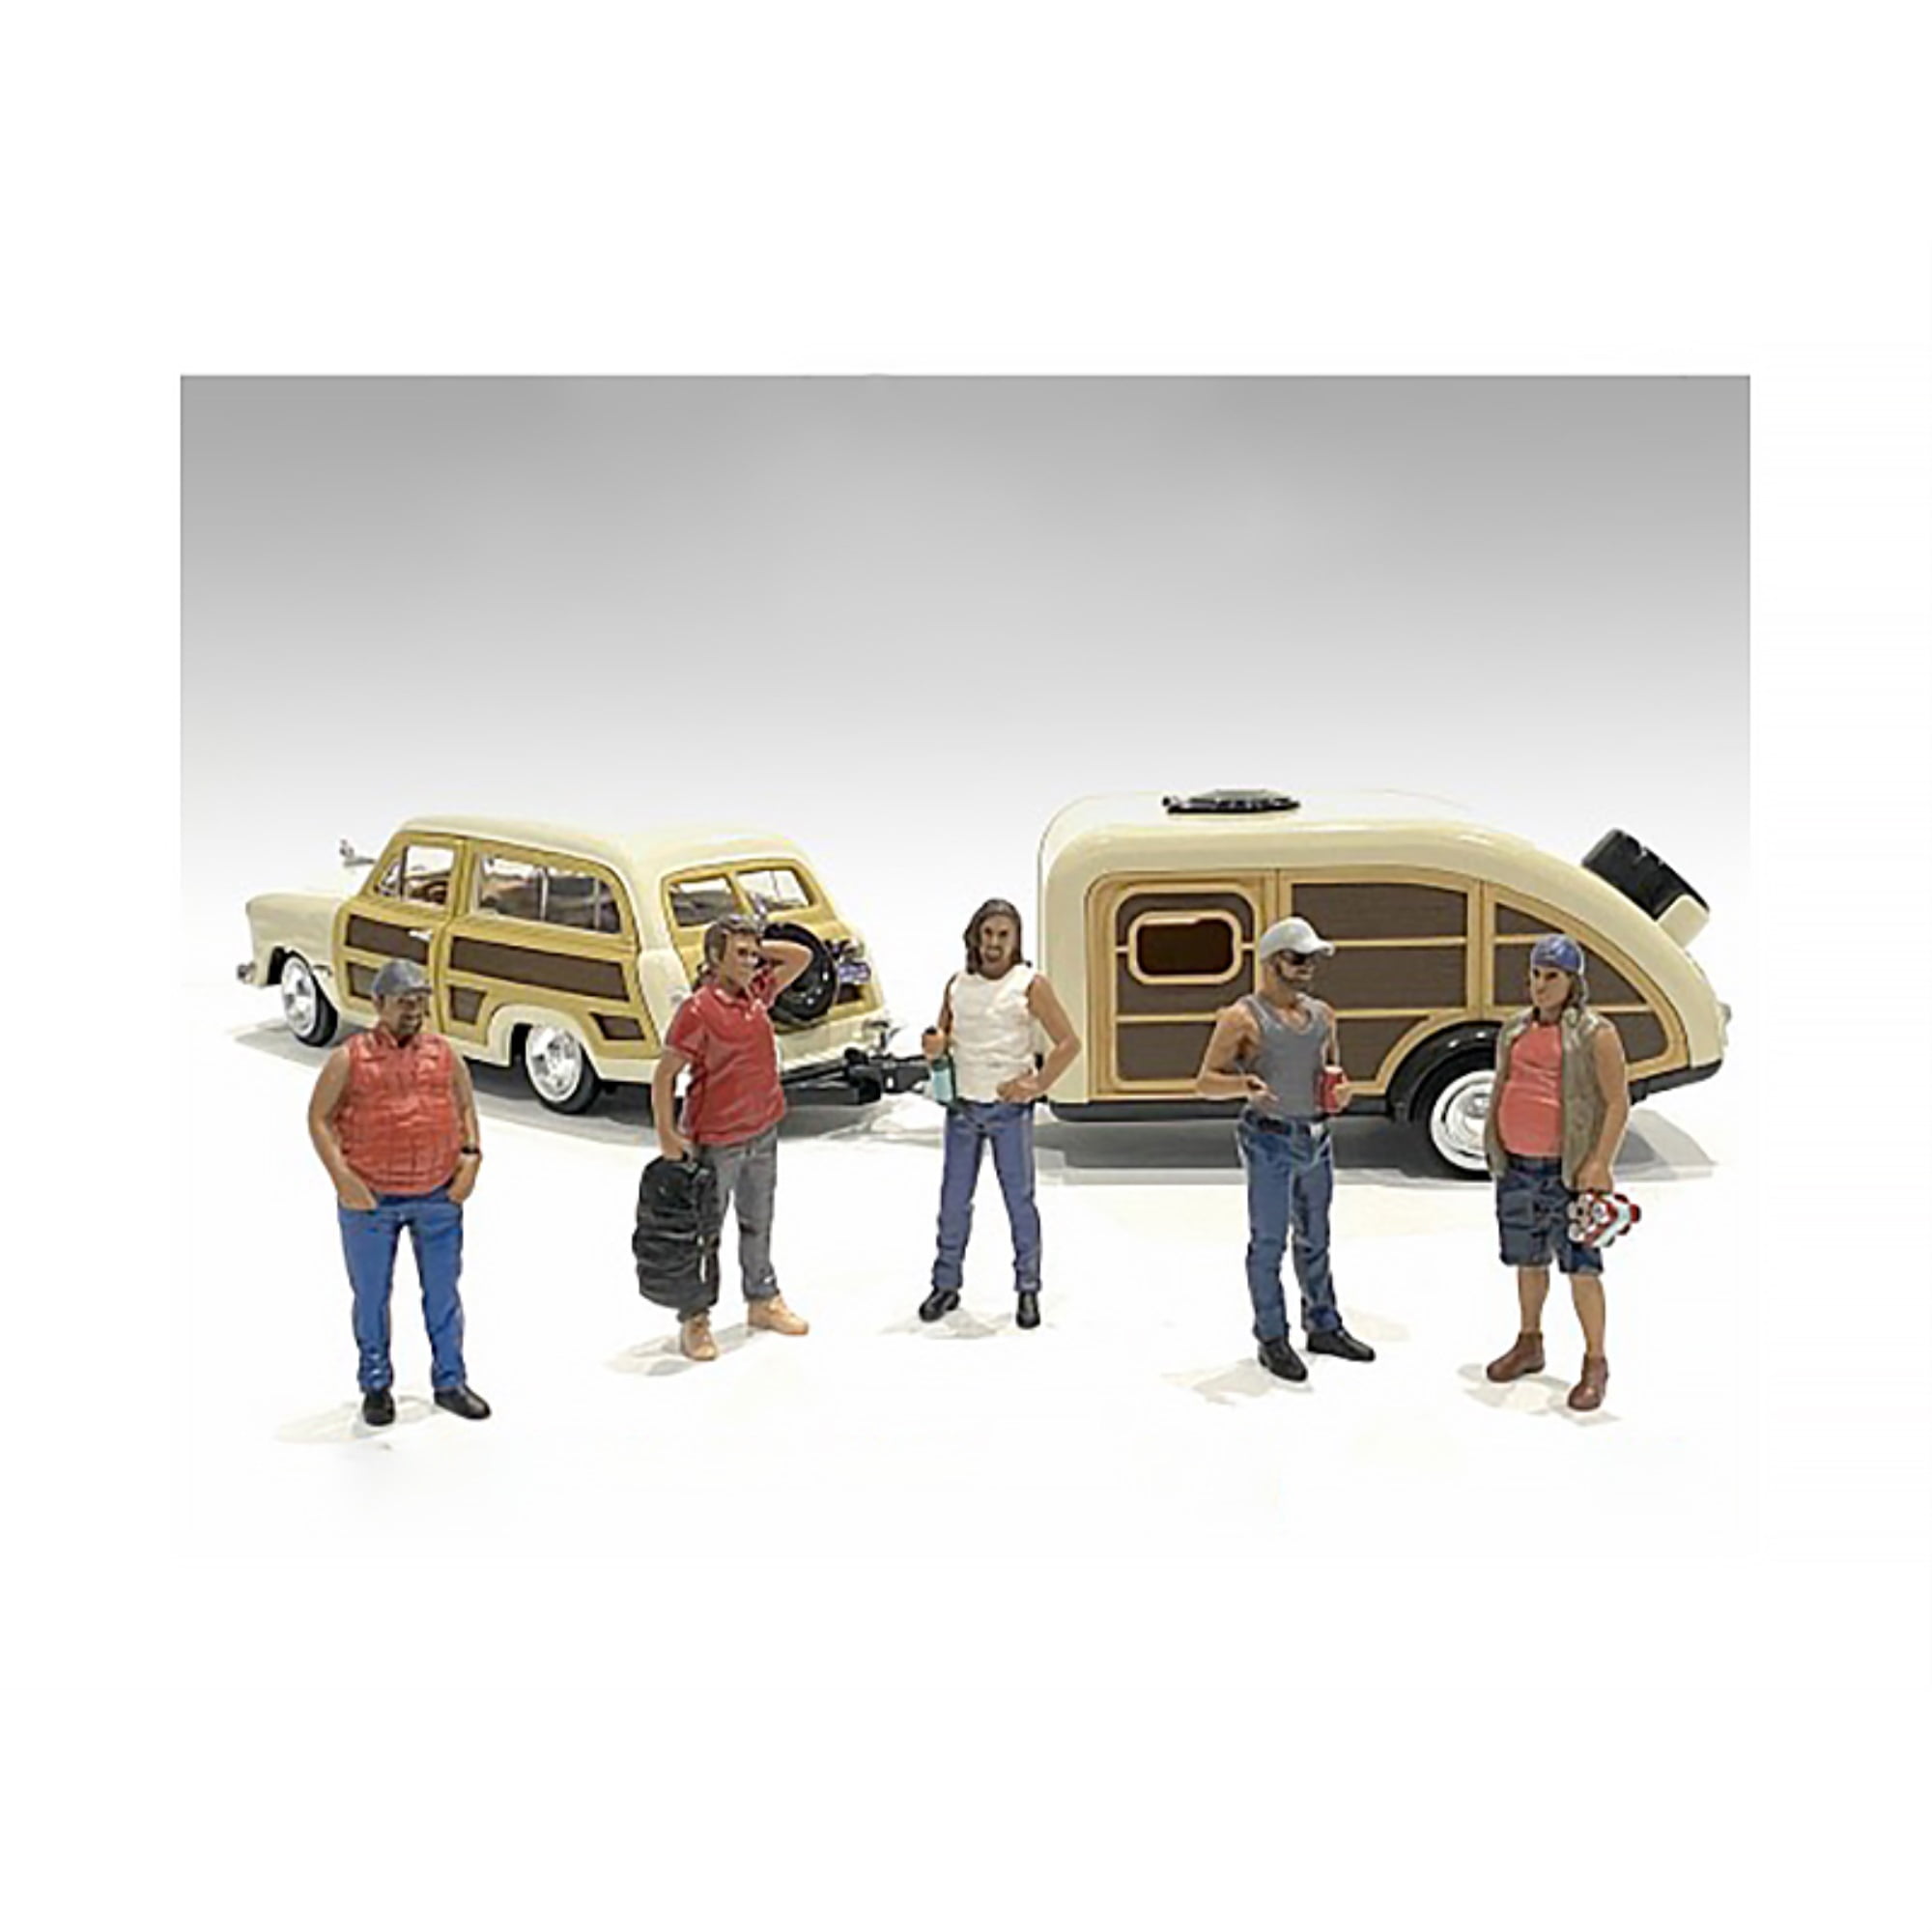 Picture of American Diorama 76434-76435-76436-76437-76438 Campers Series Figure Set for 1 by 24 Scale Models - 5 Piece